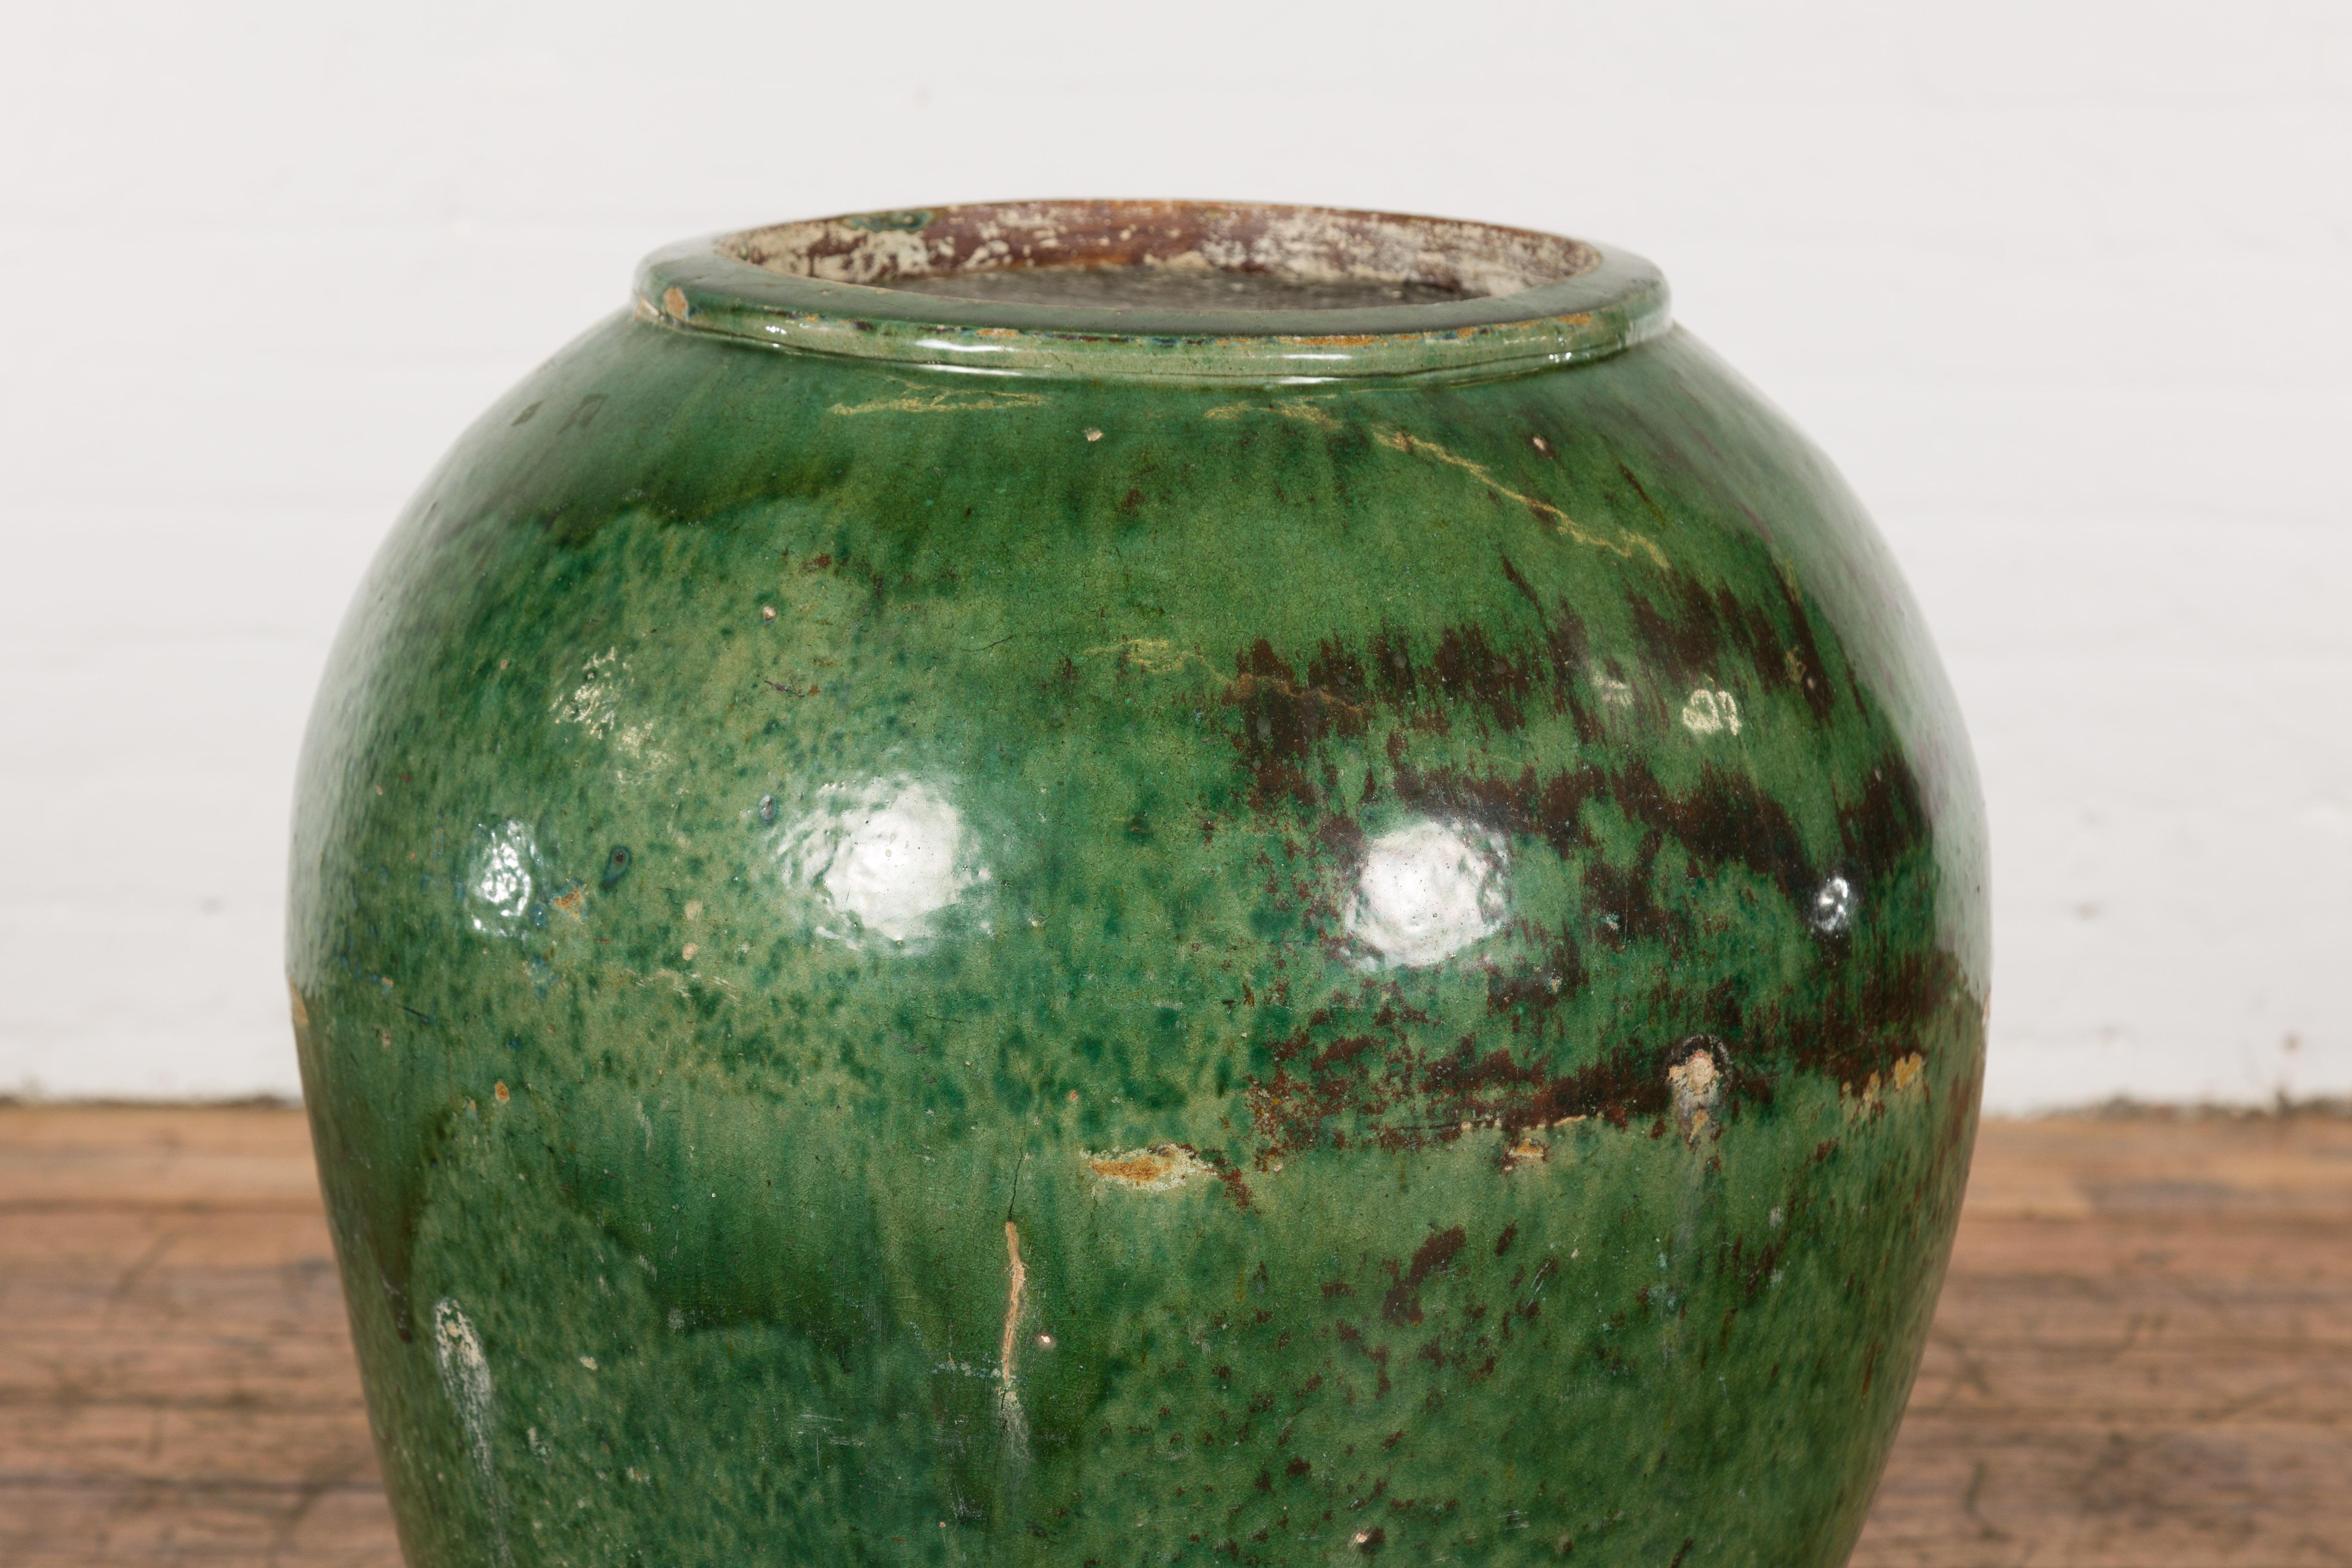 20th Century Large Vintage Chinese Vessel Planter with Green Glaze and Brown Accents